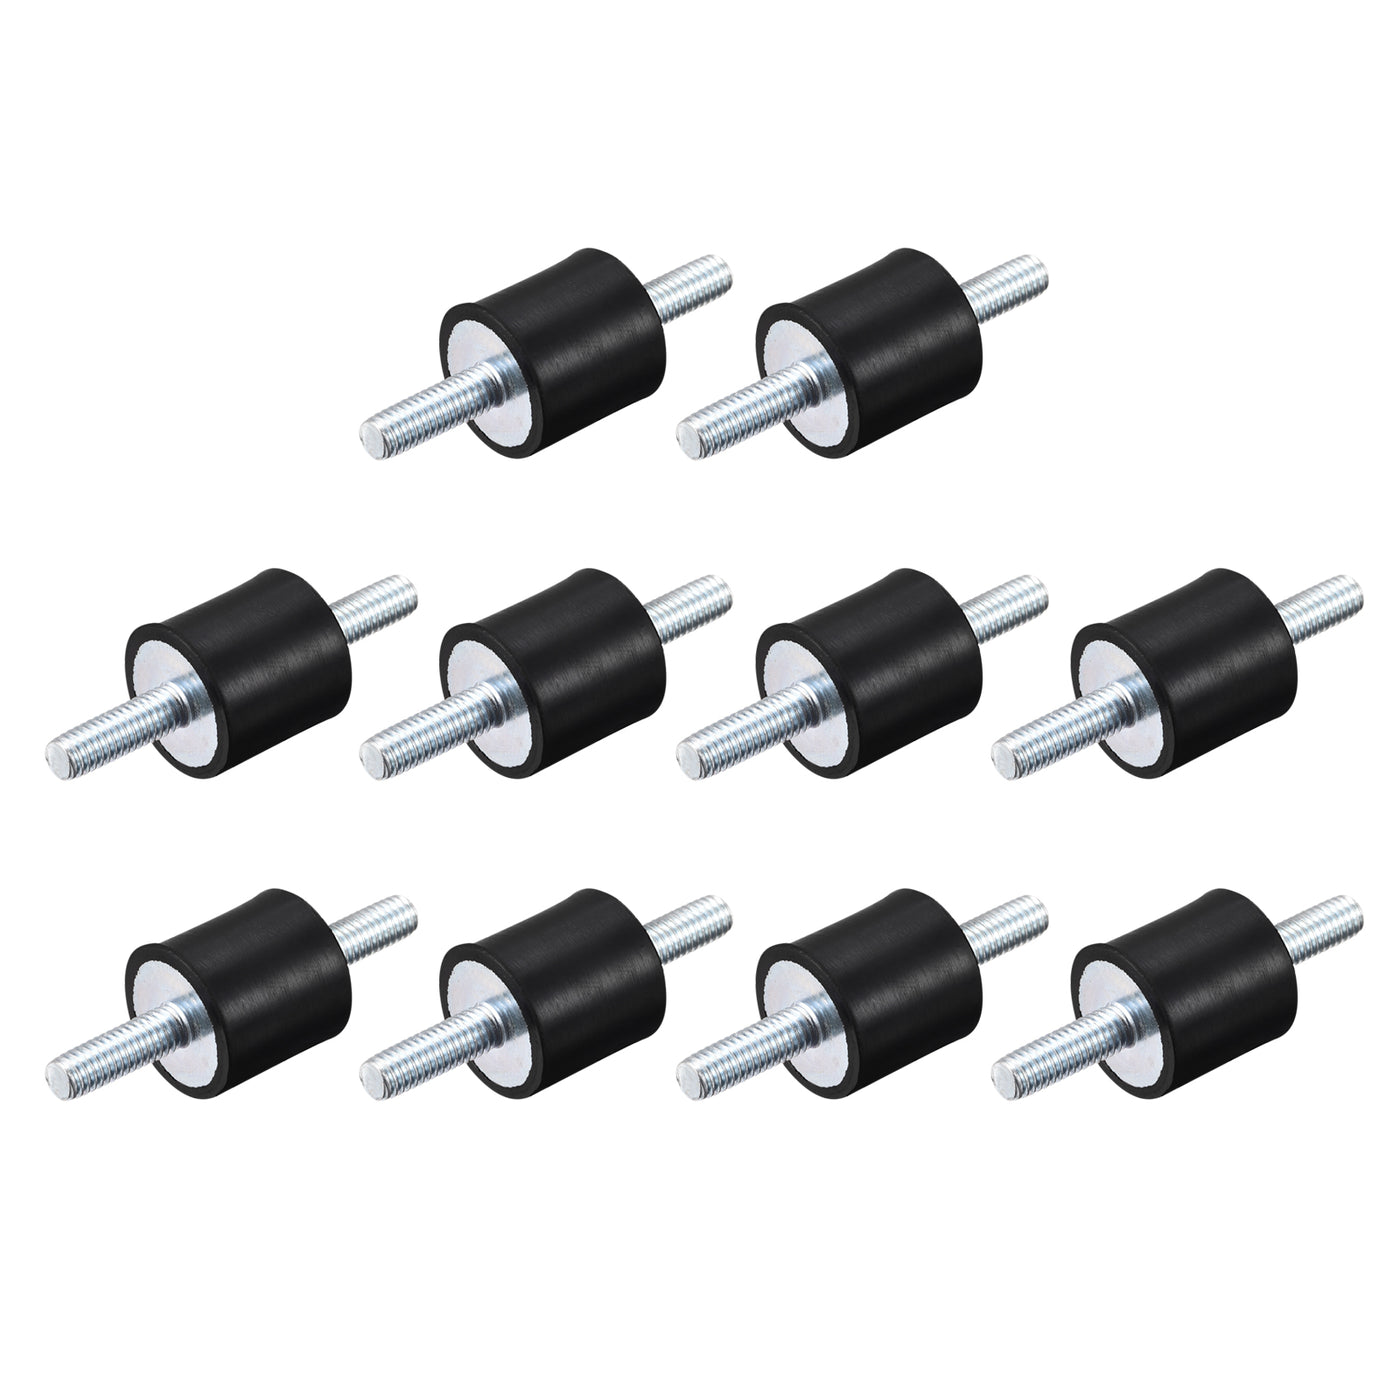 uxcell Uxcell M6x18mm Rubber Mounts, 10pcs Anti Isolator Studs Shock Absorber Male, 20x20mm